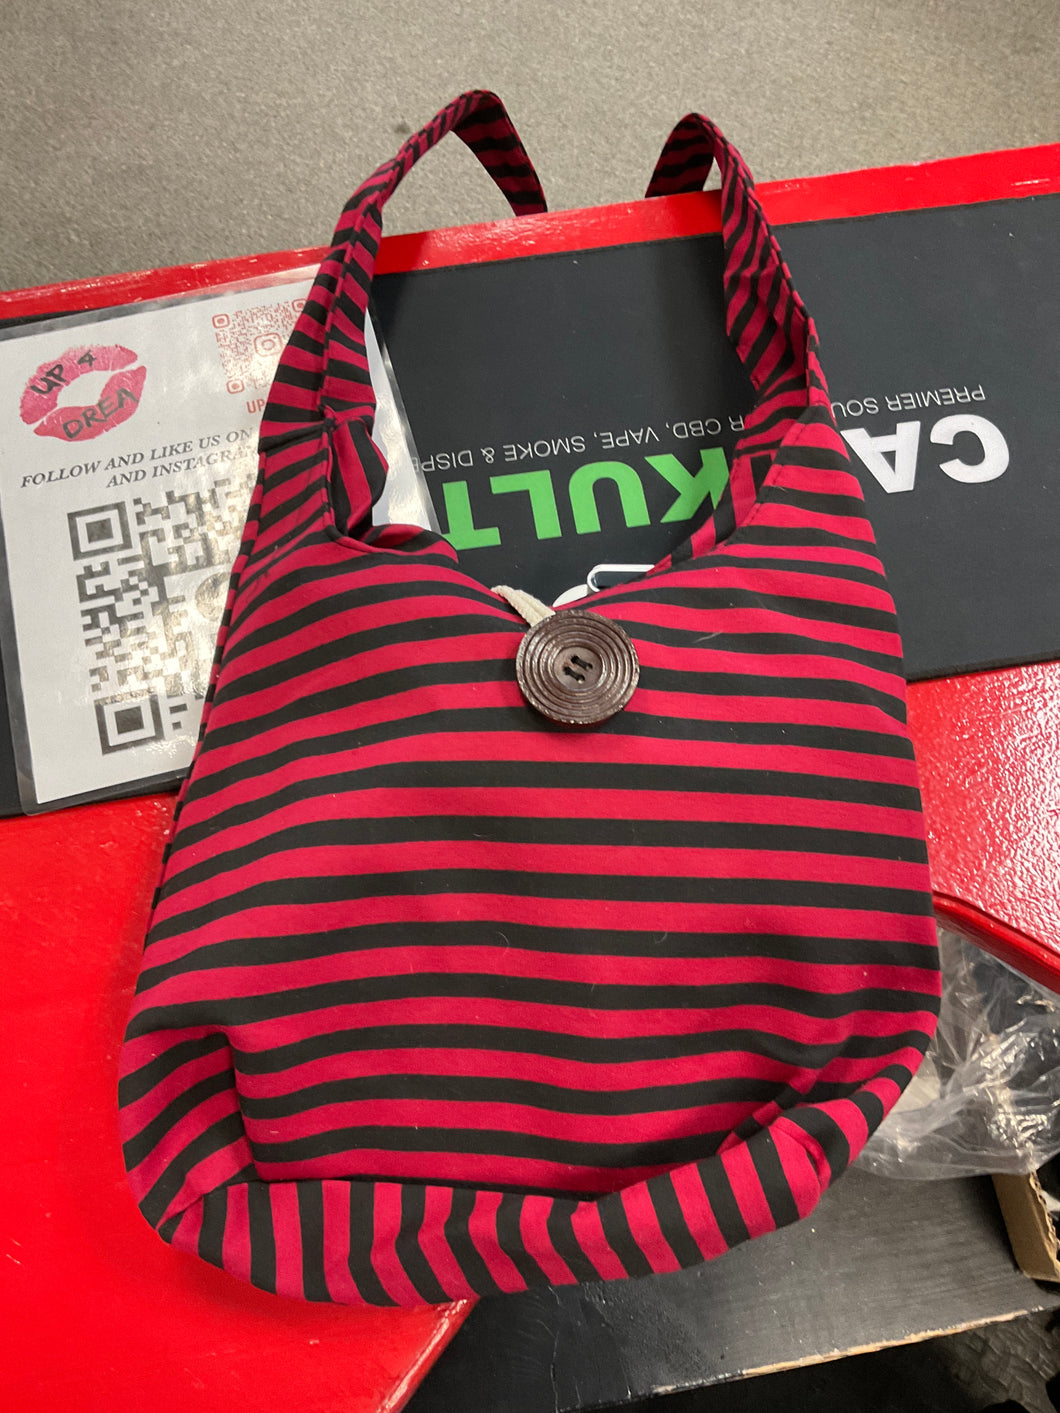 Red and black hobo bag purse